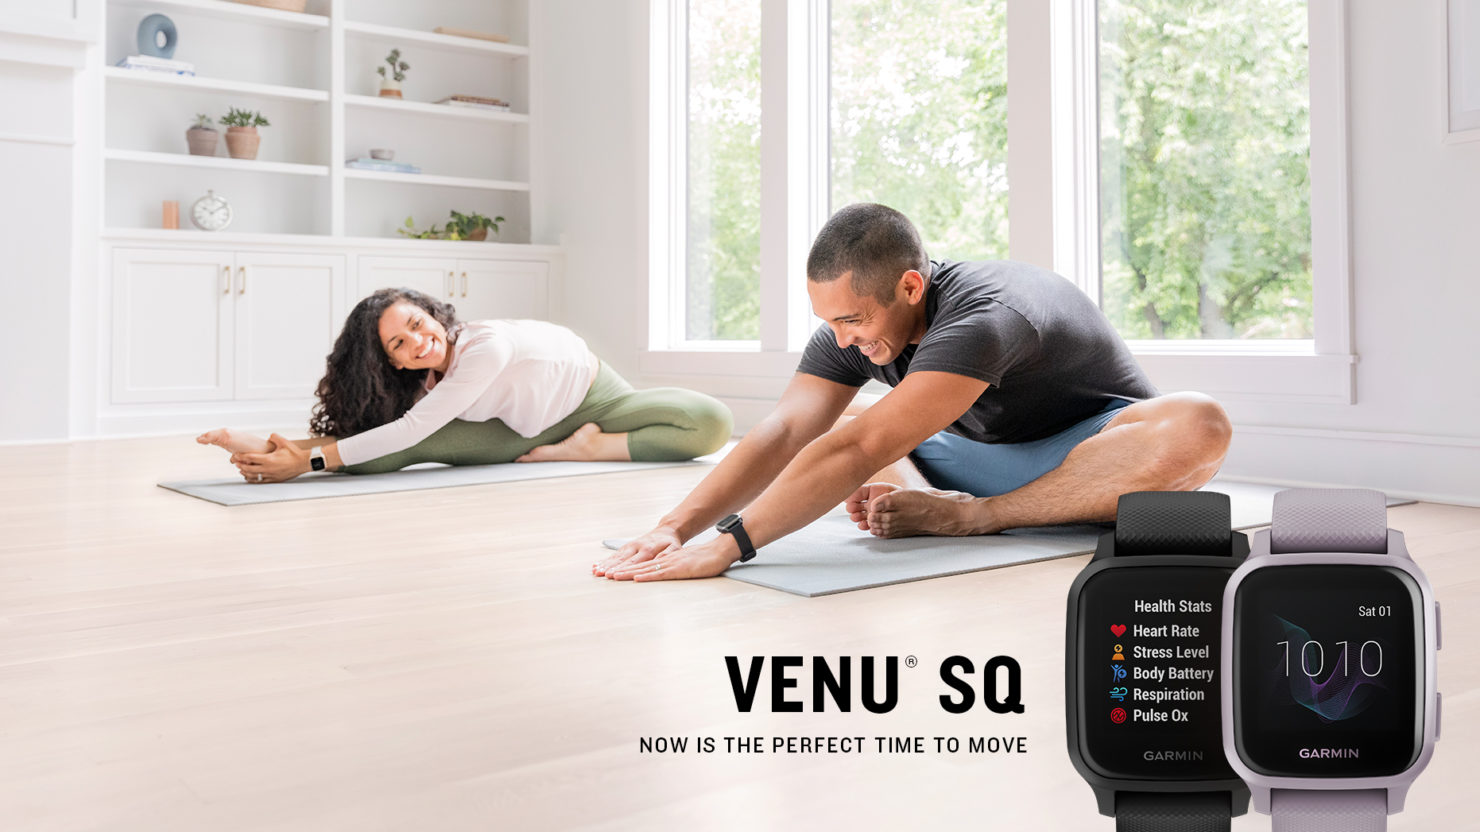 Now is the perfect time to move with the new Venu Sq GPS smartwatch from  Garmin - Garmin Newsroom